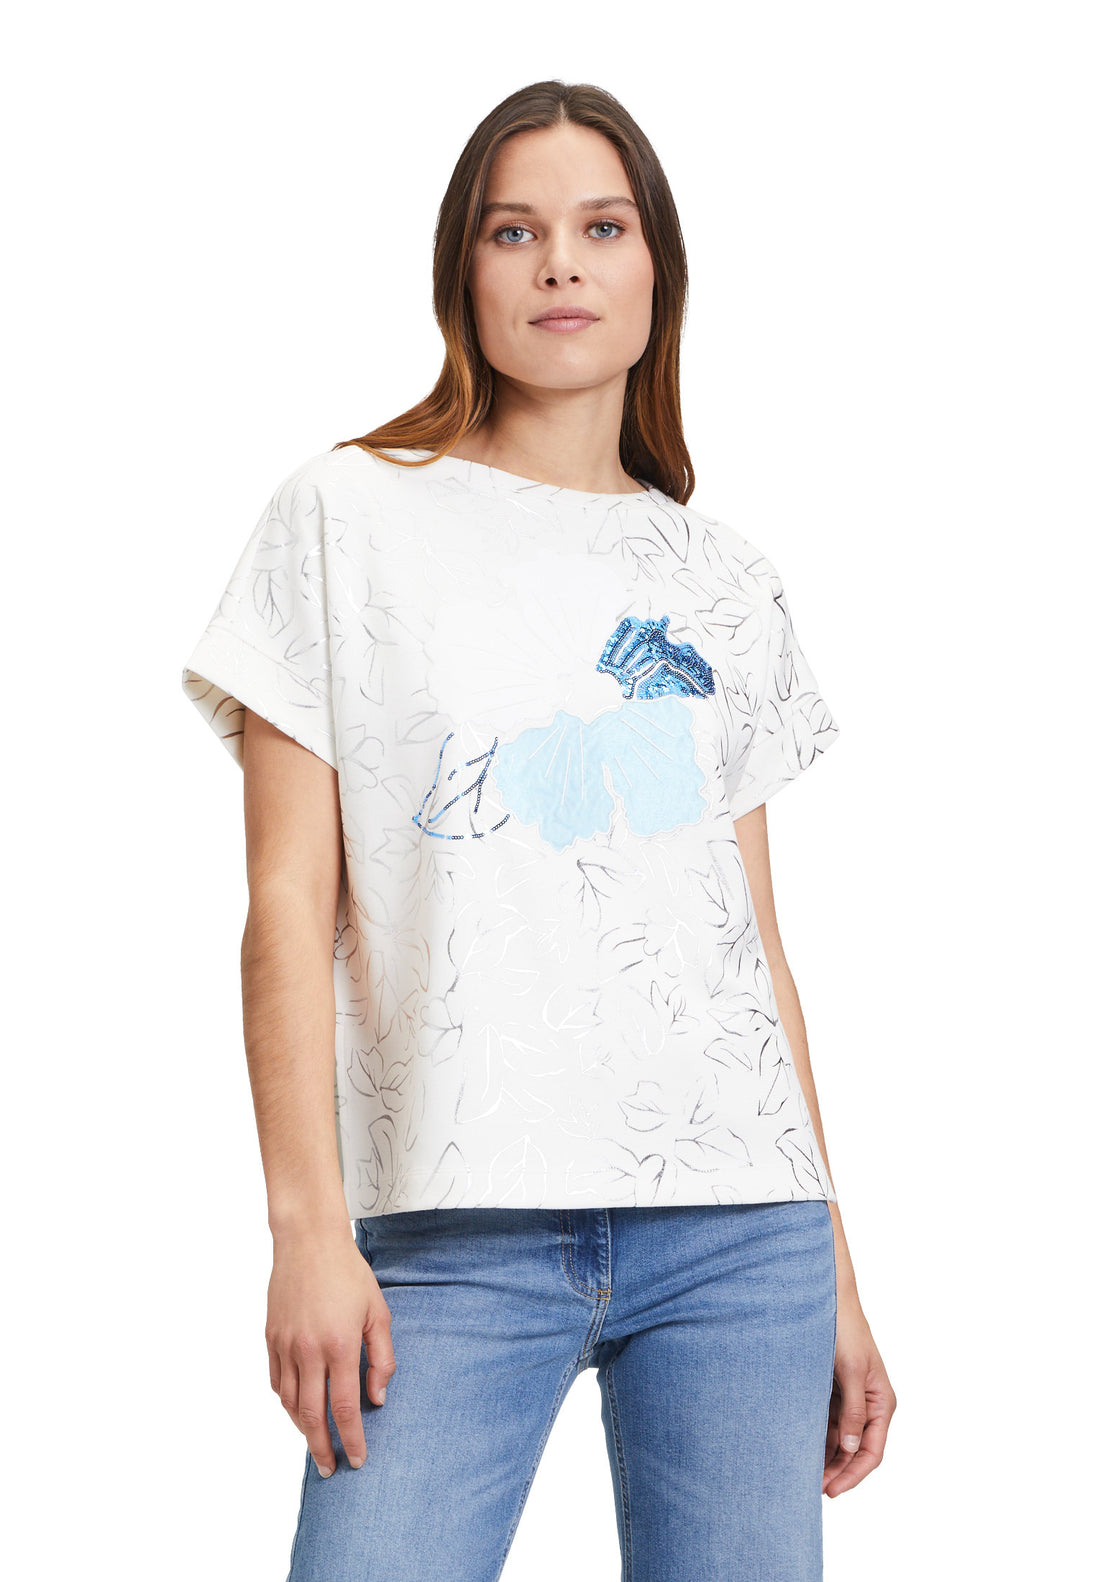 Short Sleeve T-Shirt With Print_2083-2591_1981_01